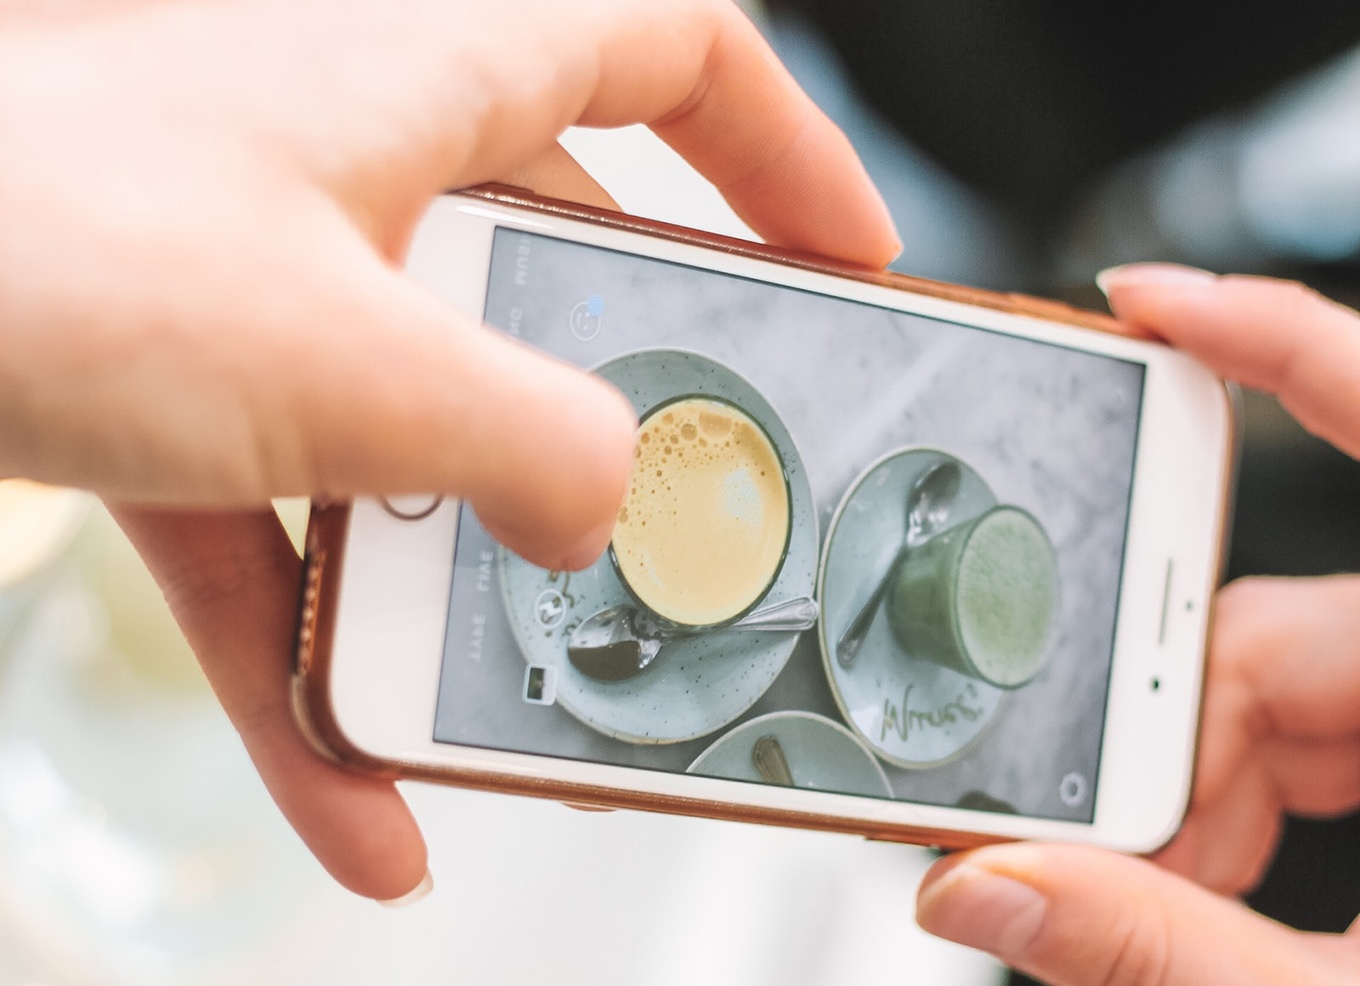 Taking picture of coffee cups